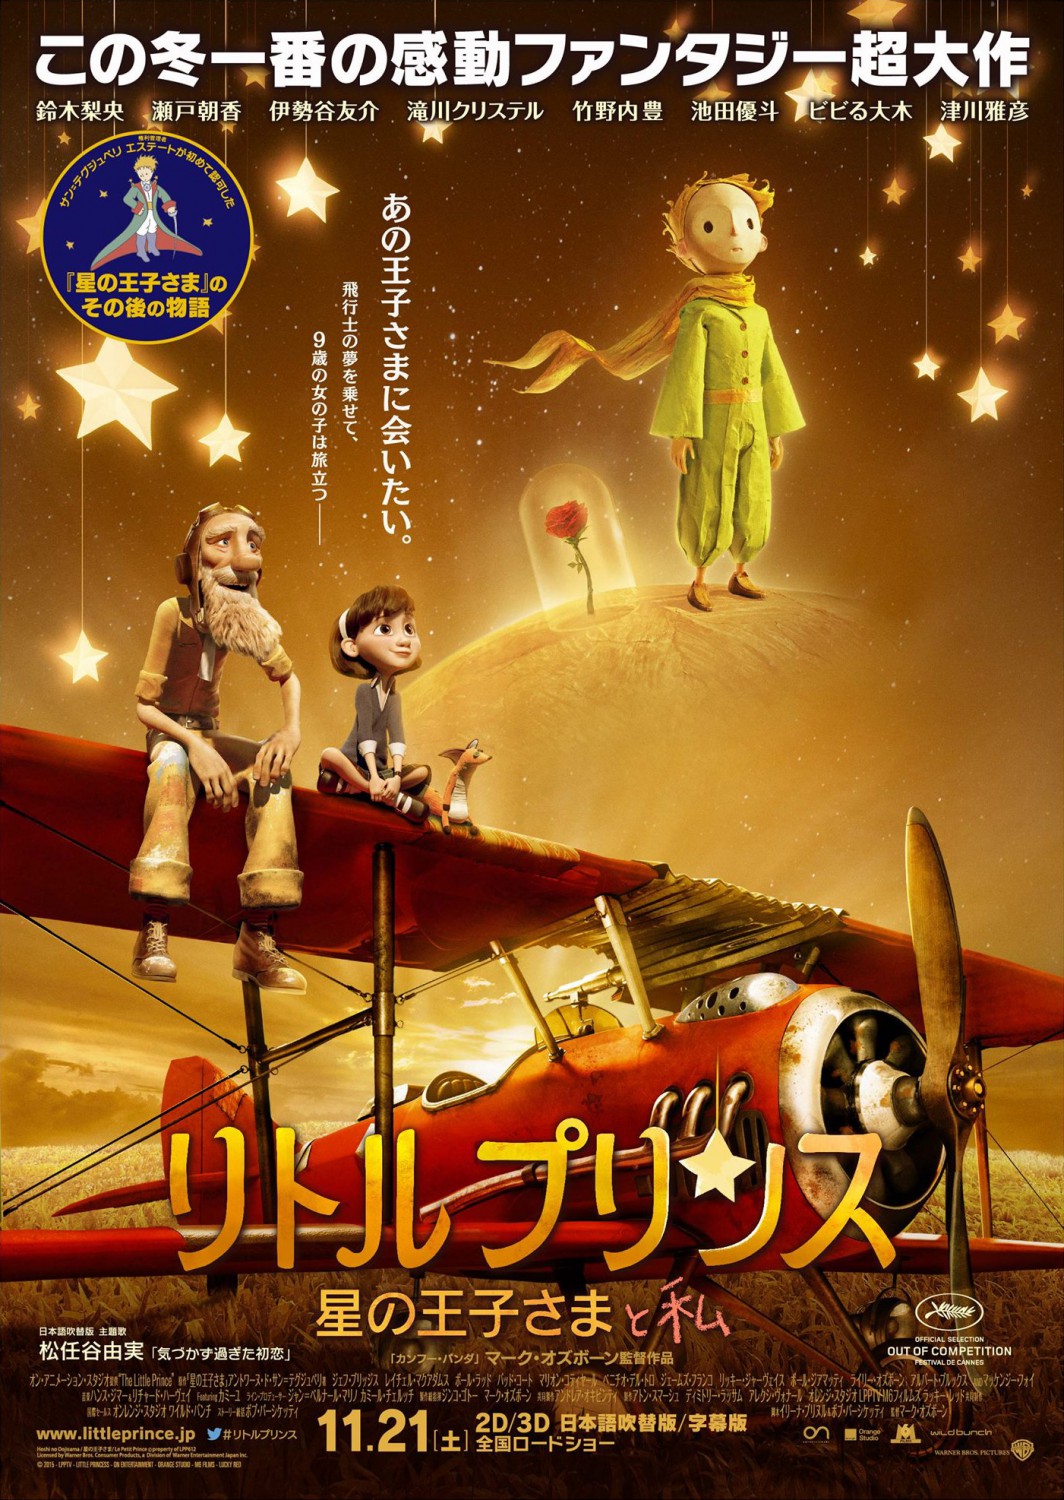 Extra Large Movie Poster Image for The Little Prince (#9 of 12)